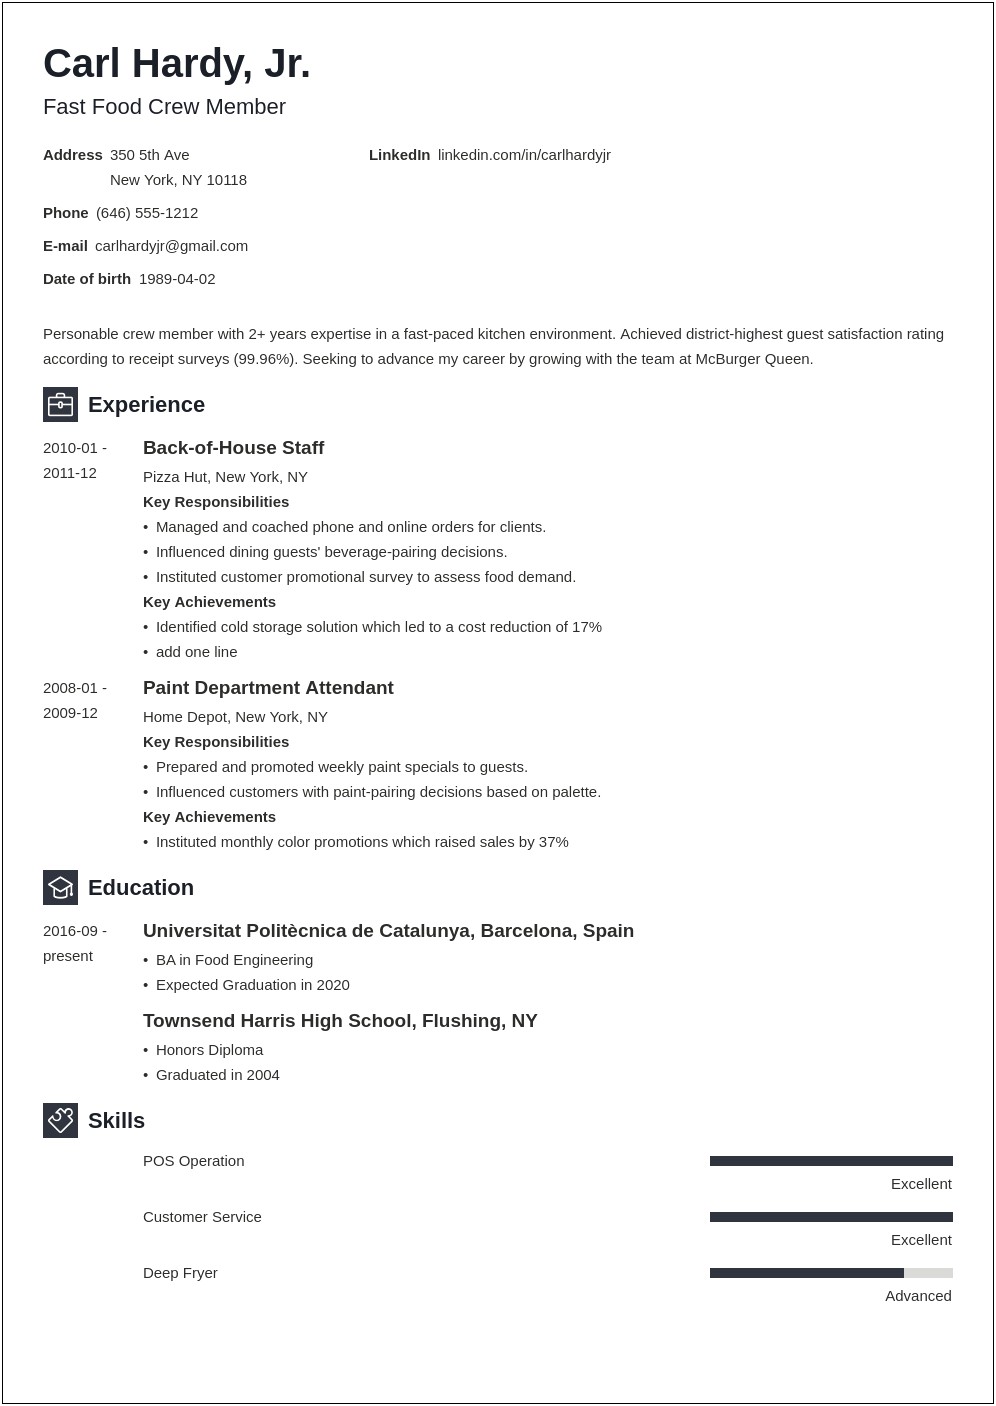 Resume Objective Examples For Fast Food Cashier